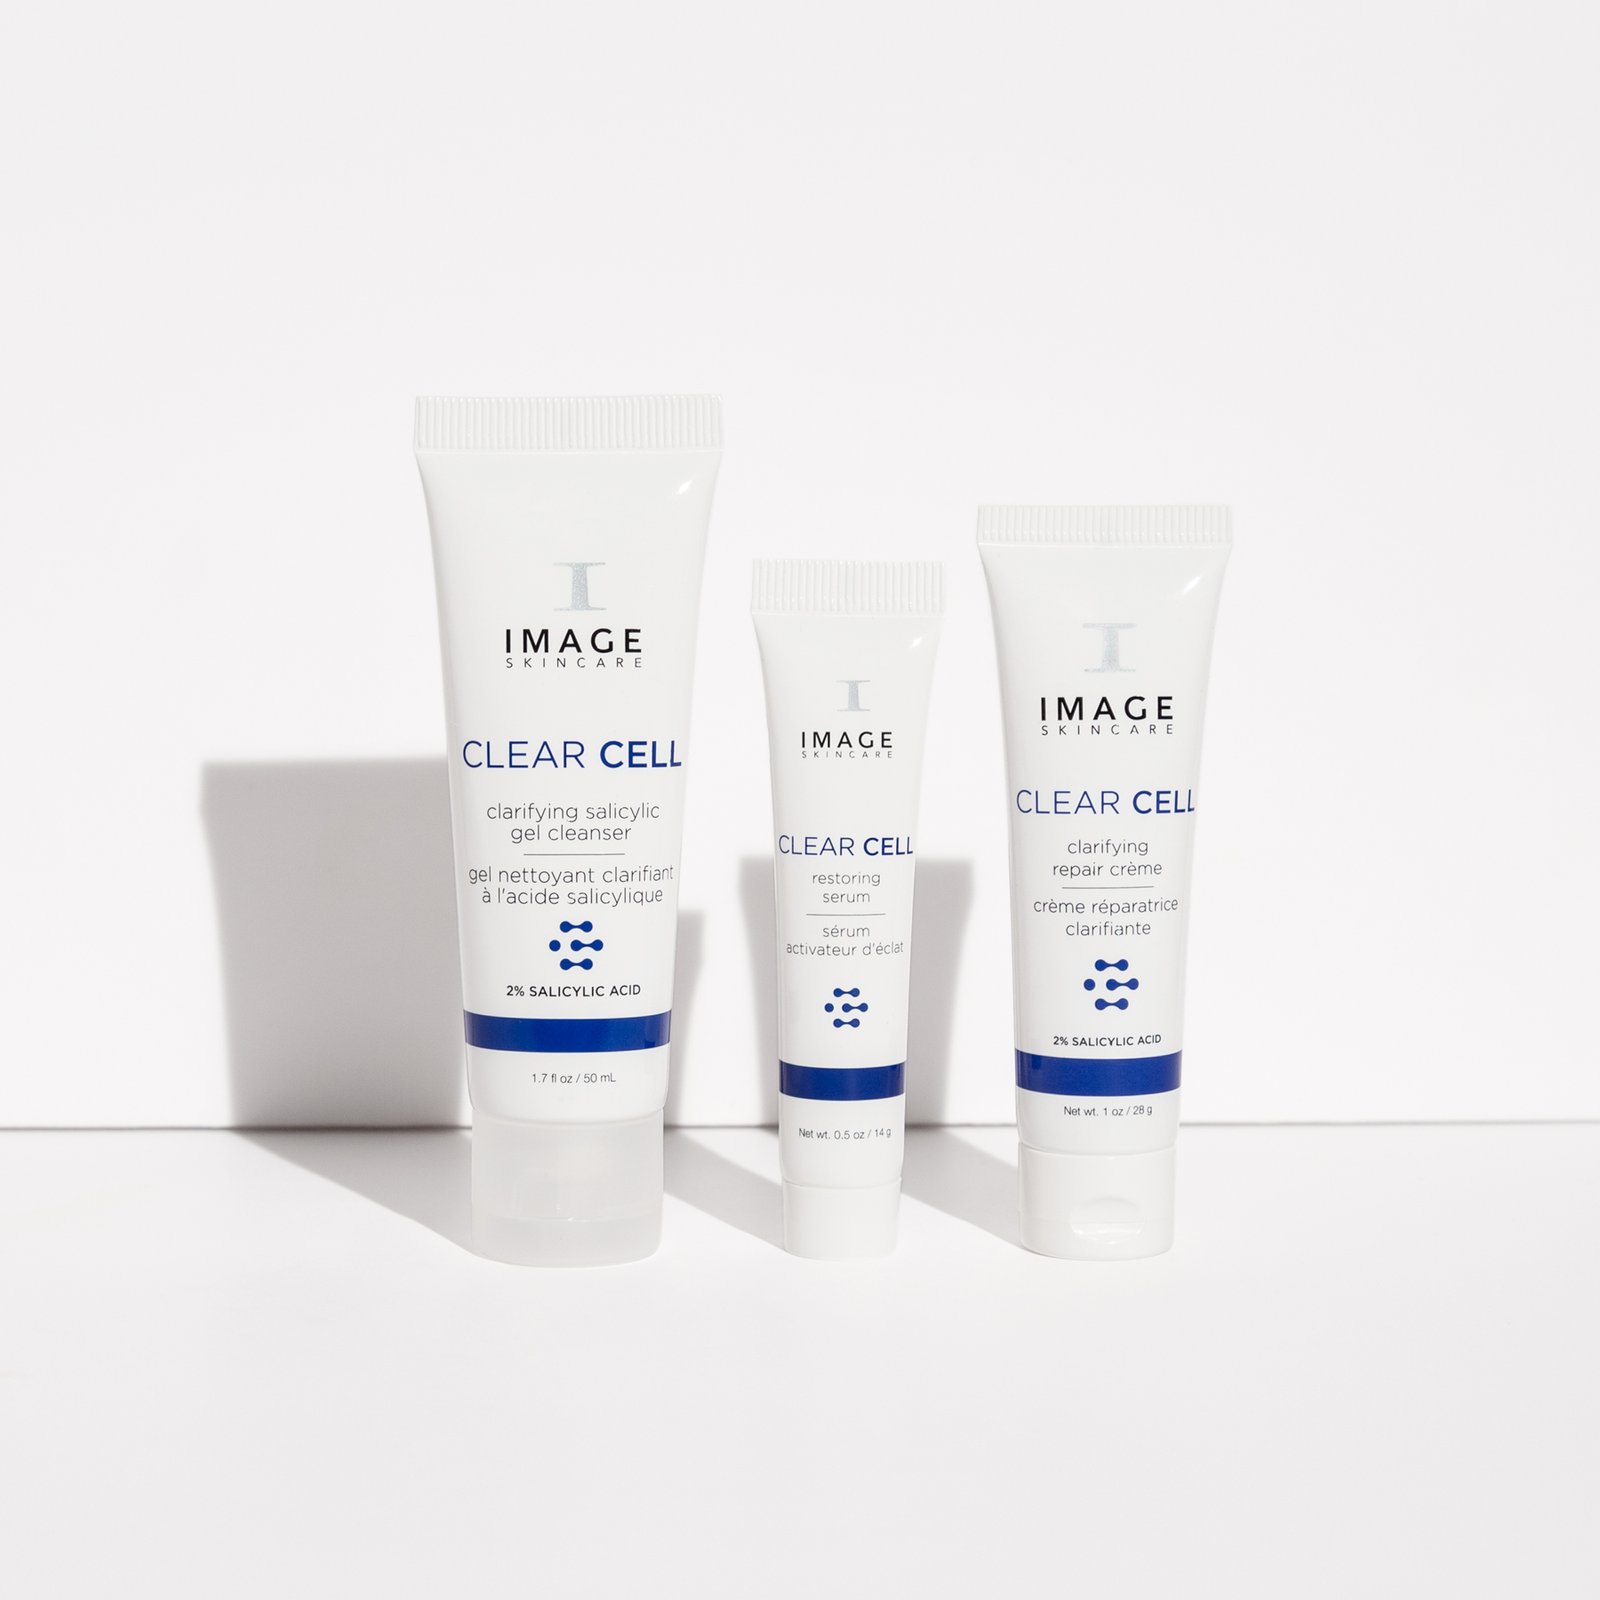 Clear Skin Solutions Kit